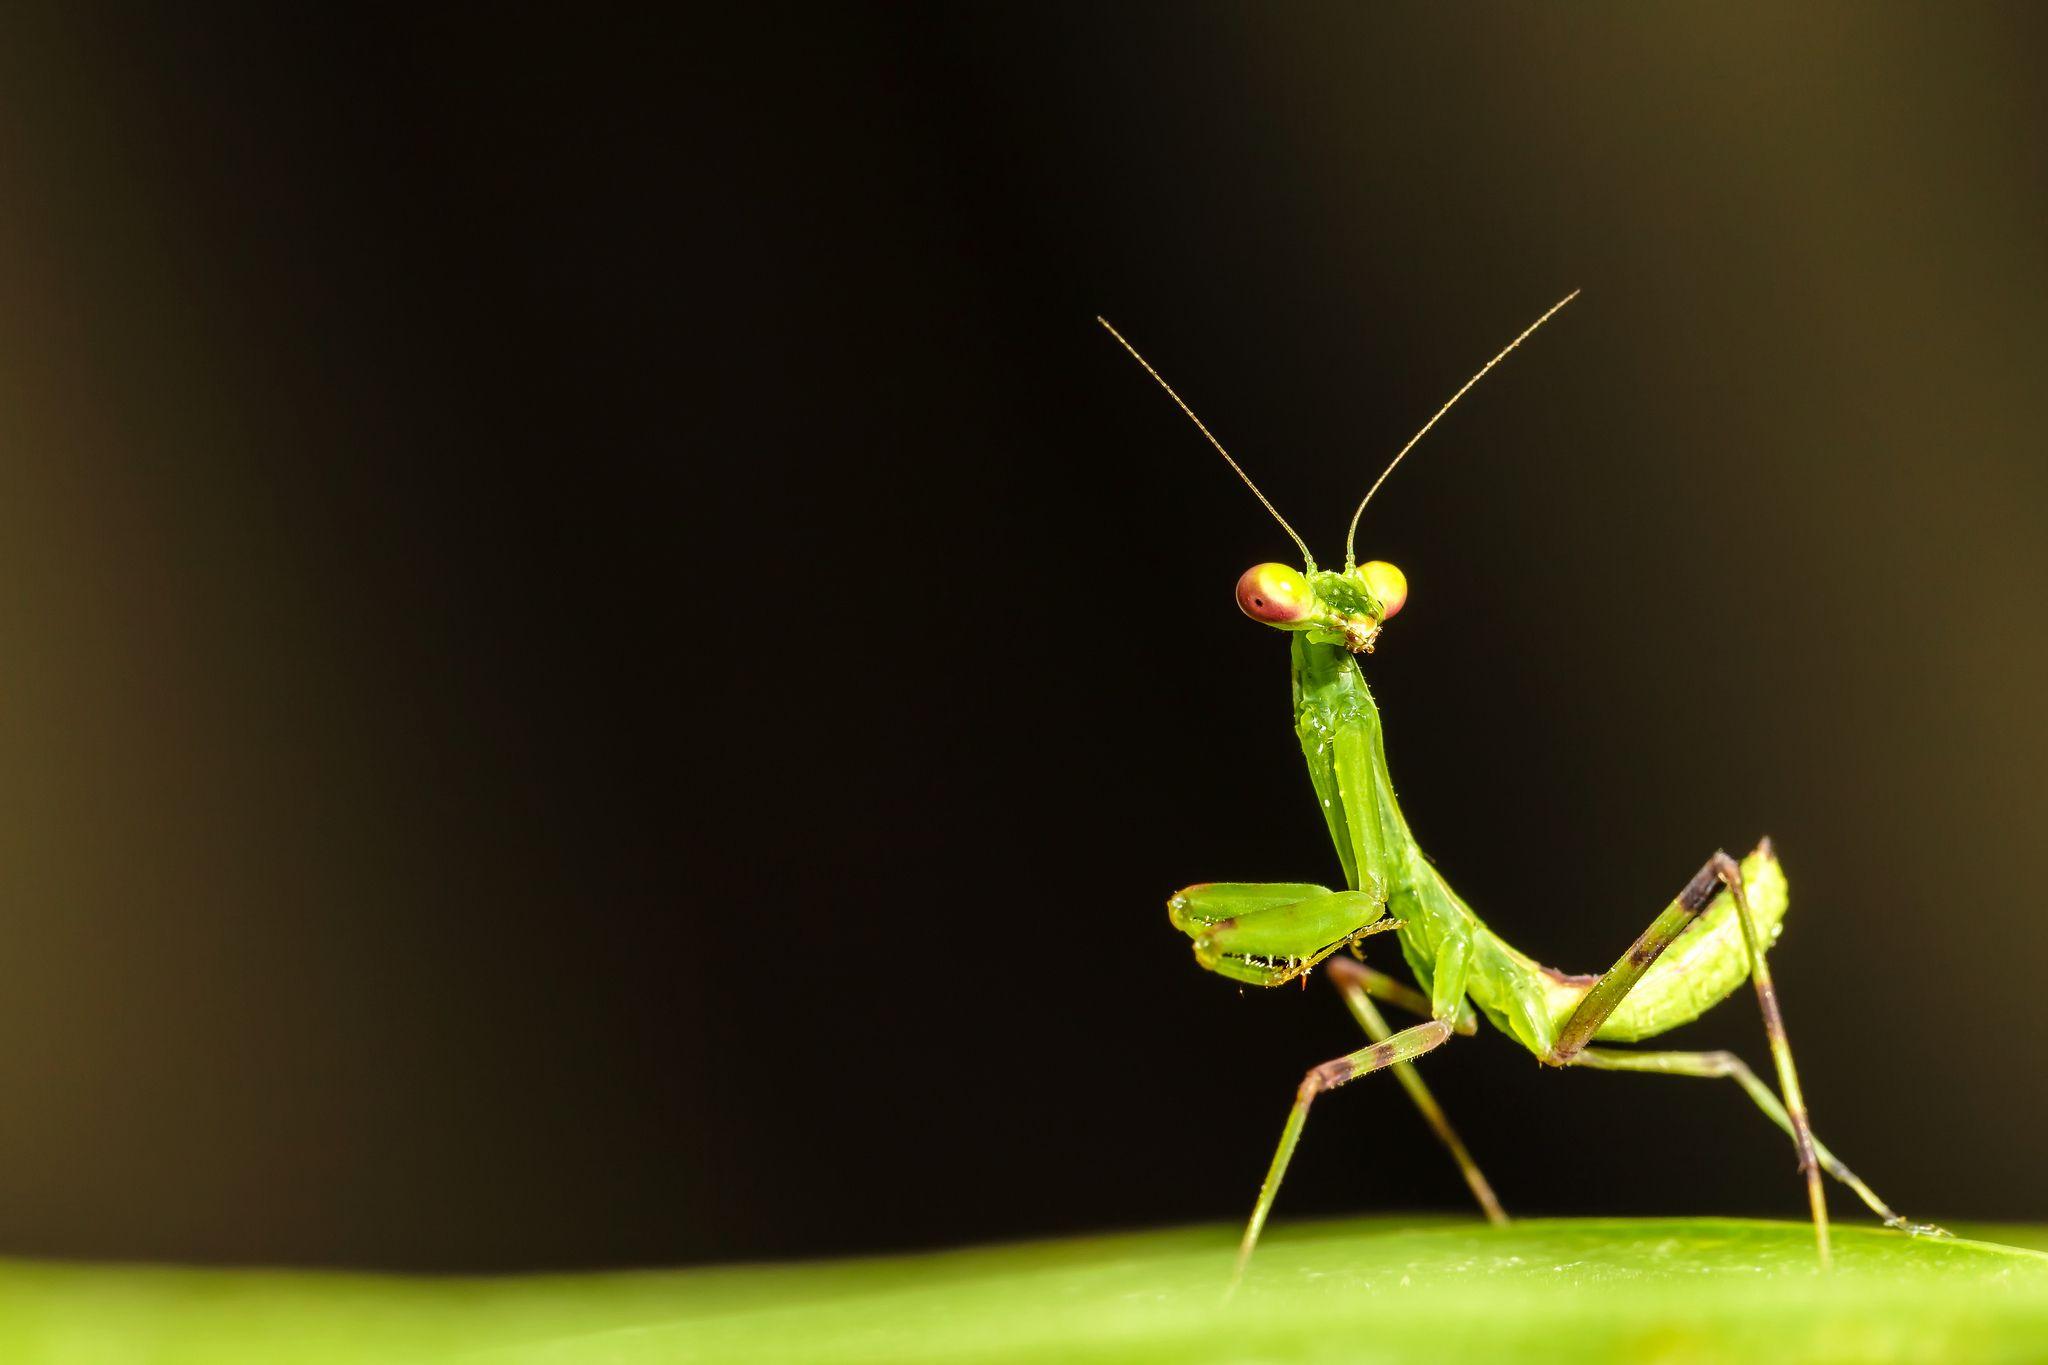 Praying Mantis: The Majestic Insect You Need to Know - MyStart